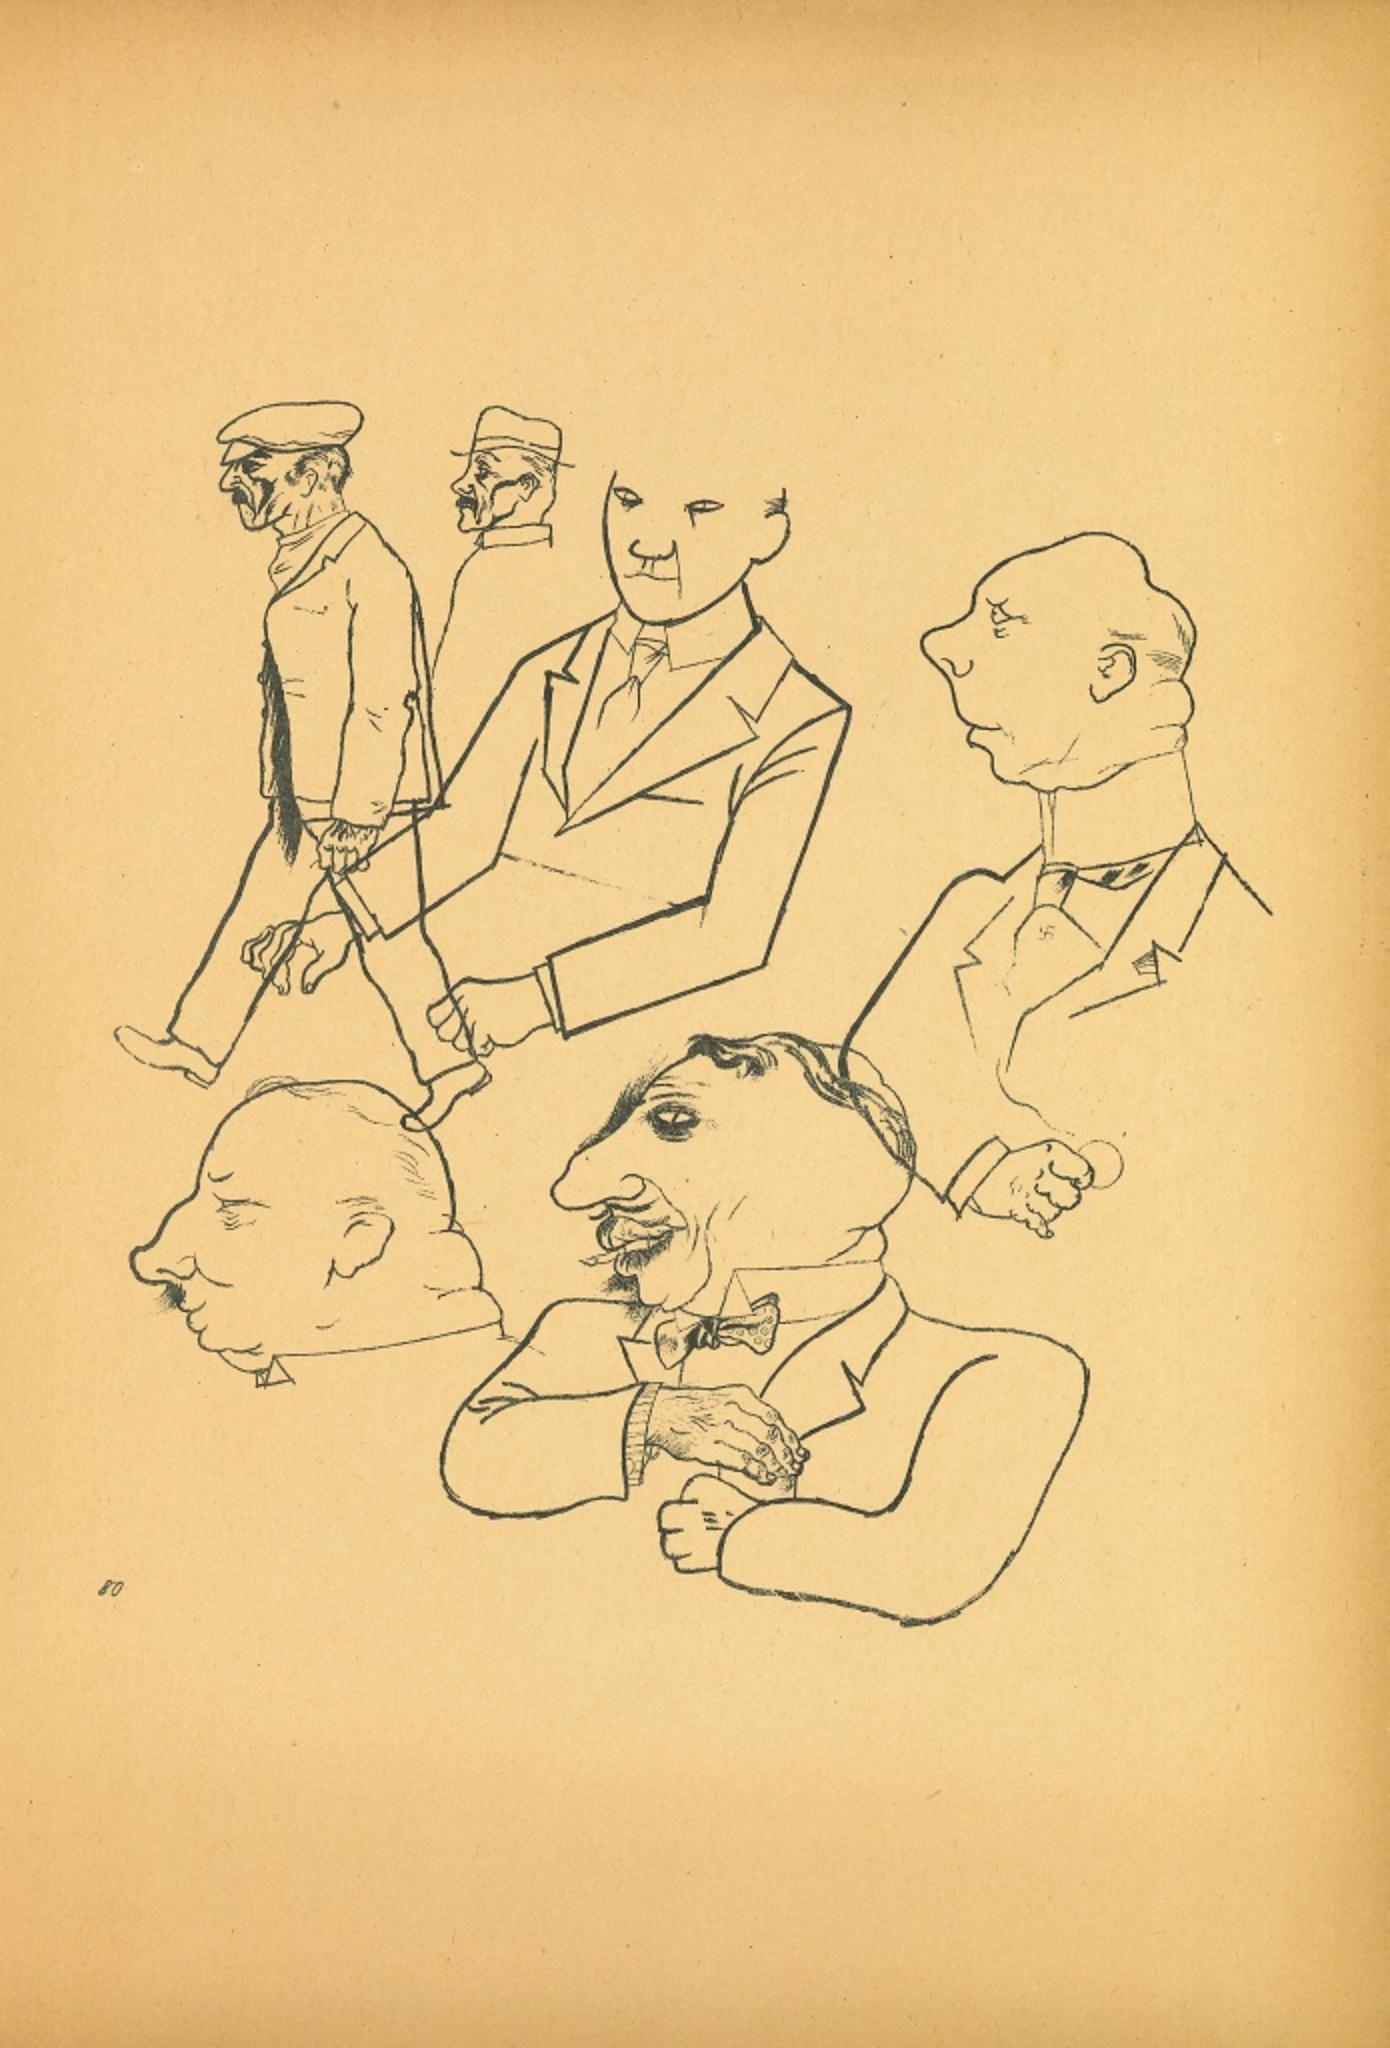 Men from Ecce Homo - Original Lithograph by George Grosz - 1923